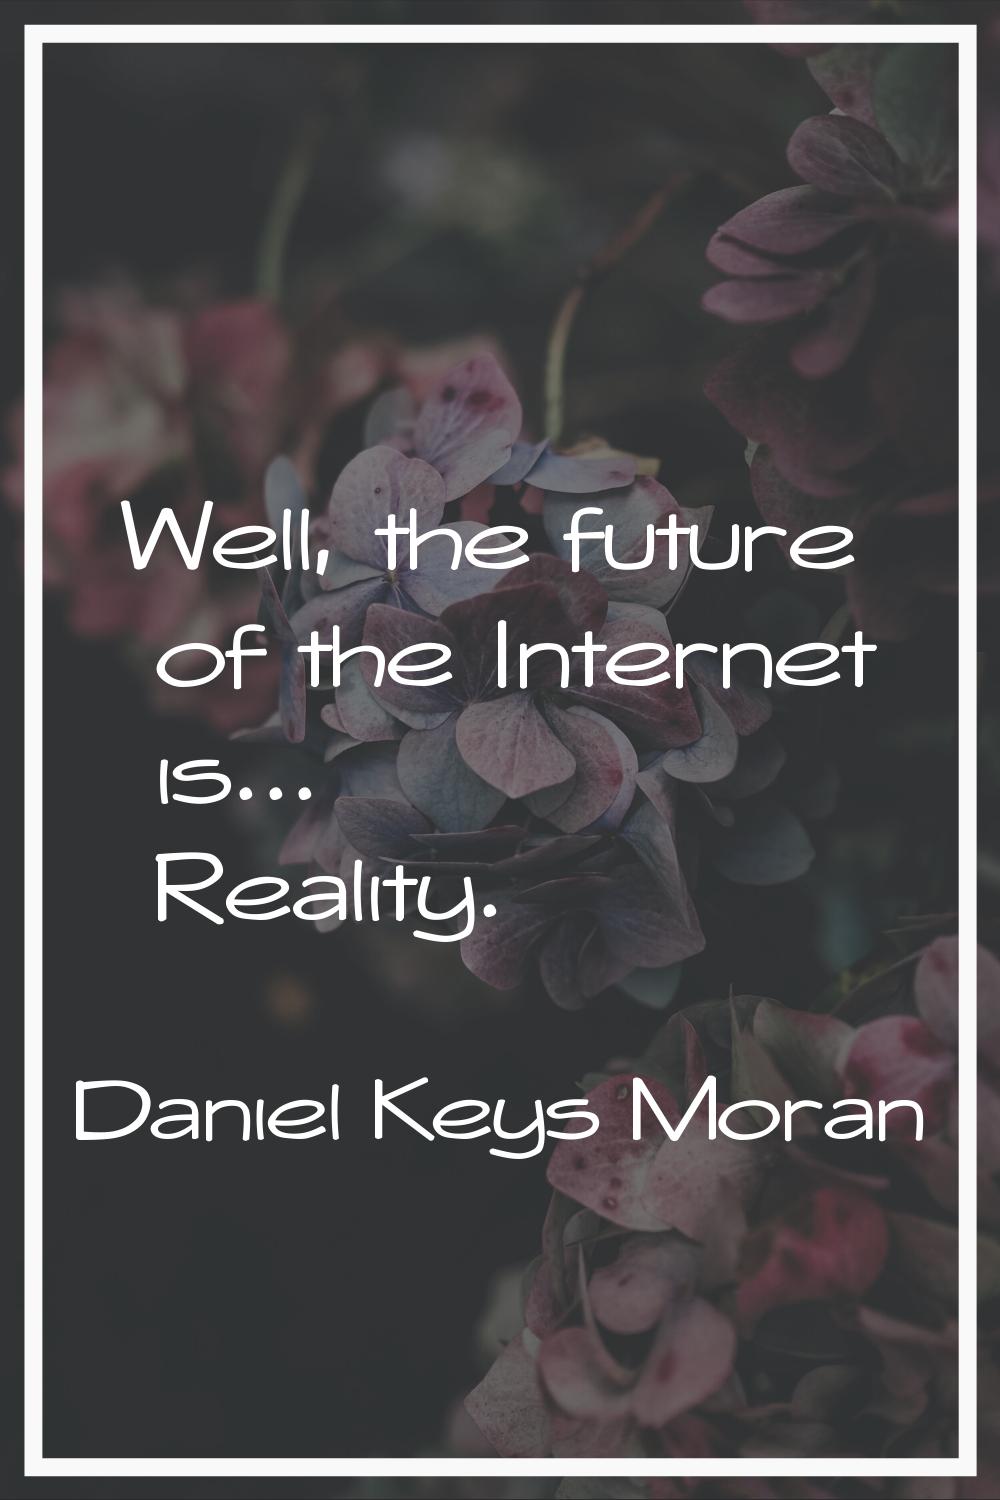 Well, the future of the Internet is... Reality.